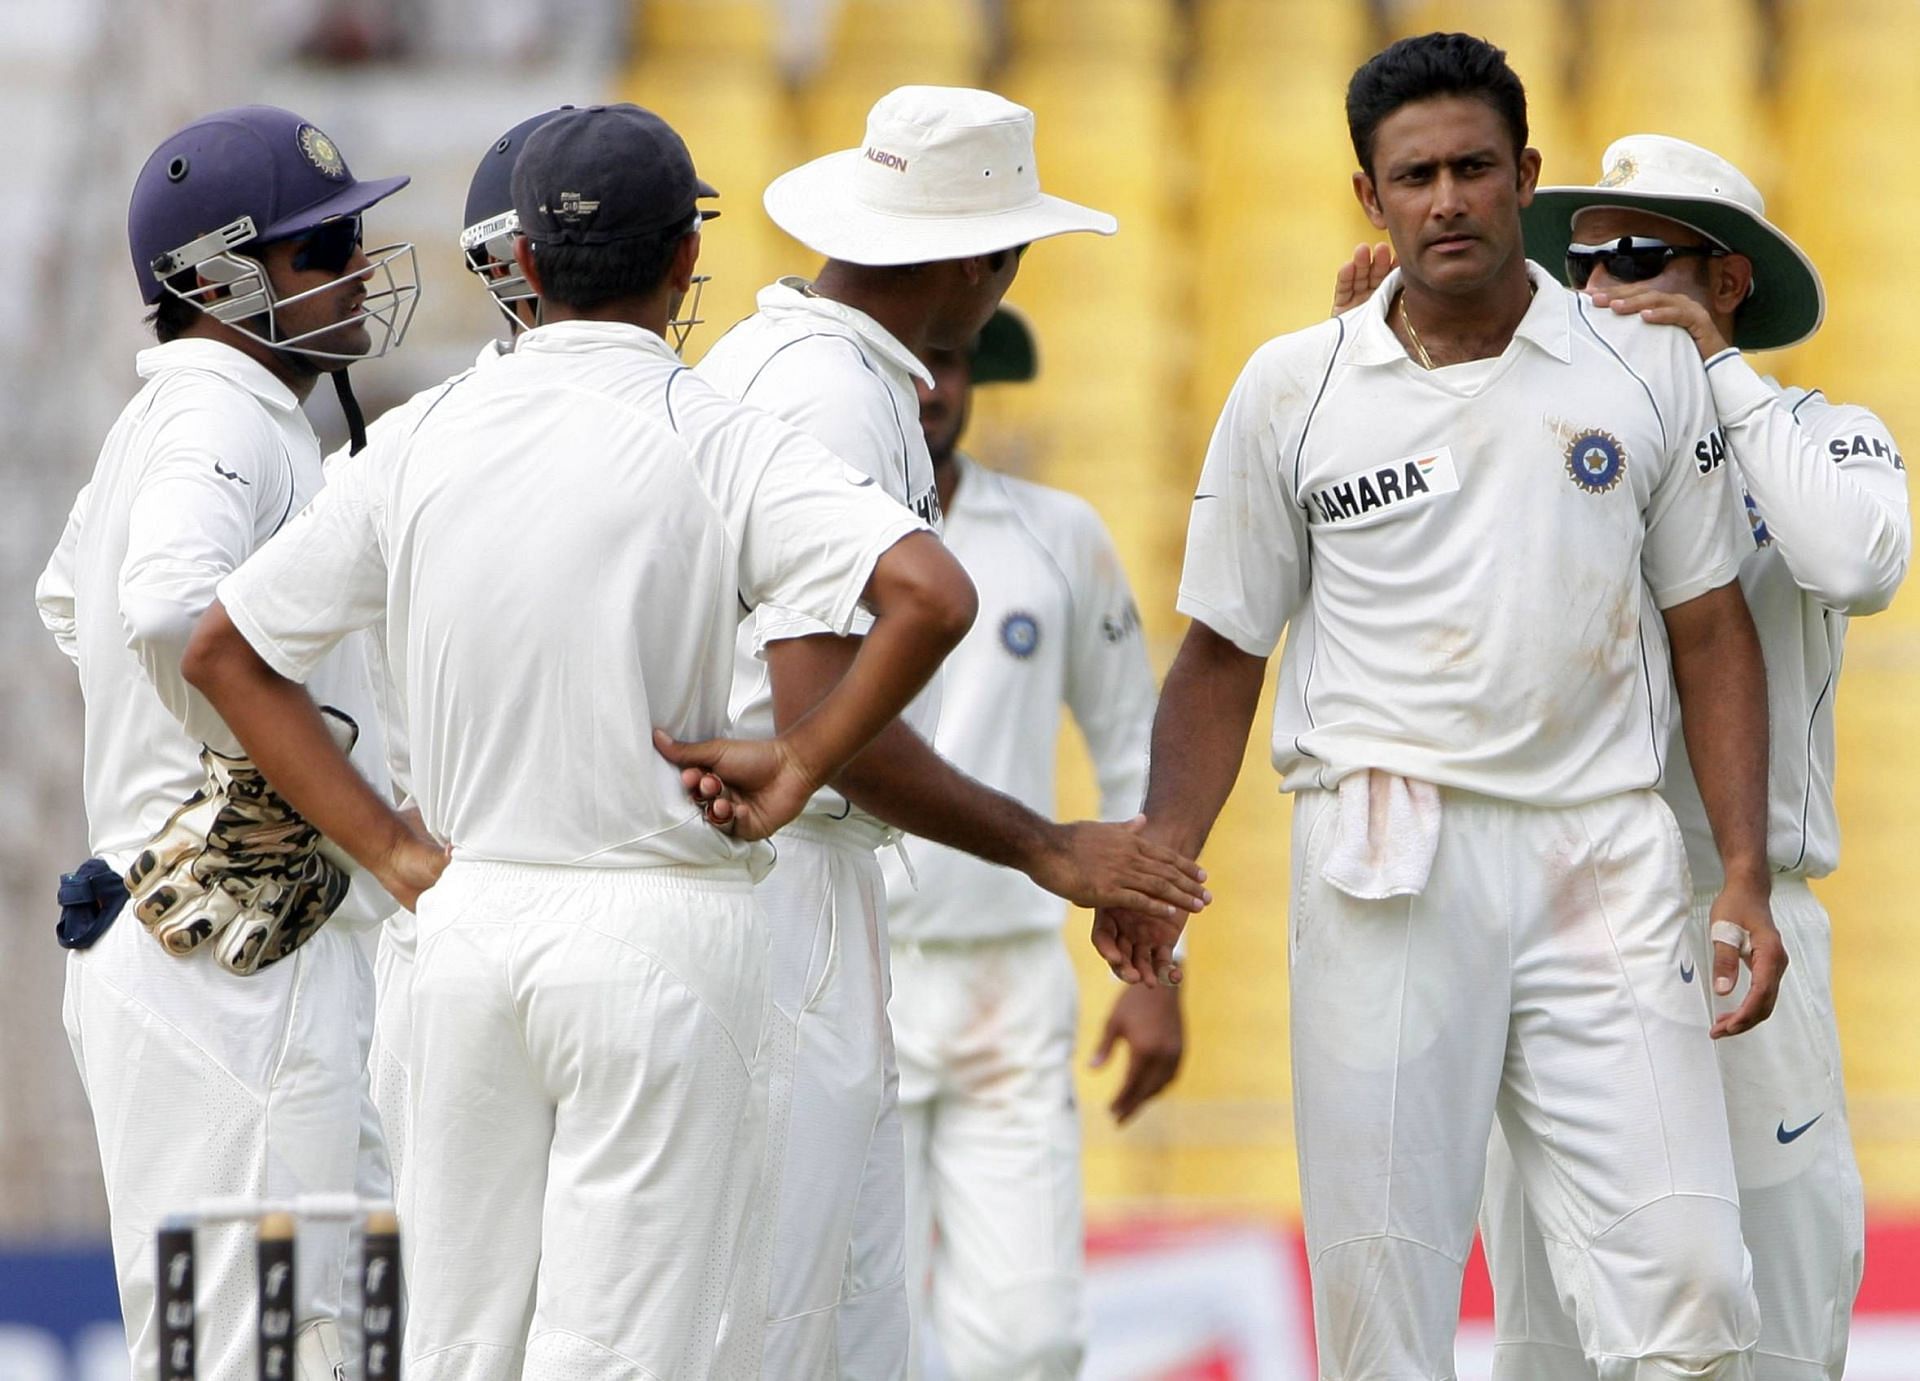 Anil Kumble won the award ten times in his career Rahul Dravid was a dependable batsman for India